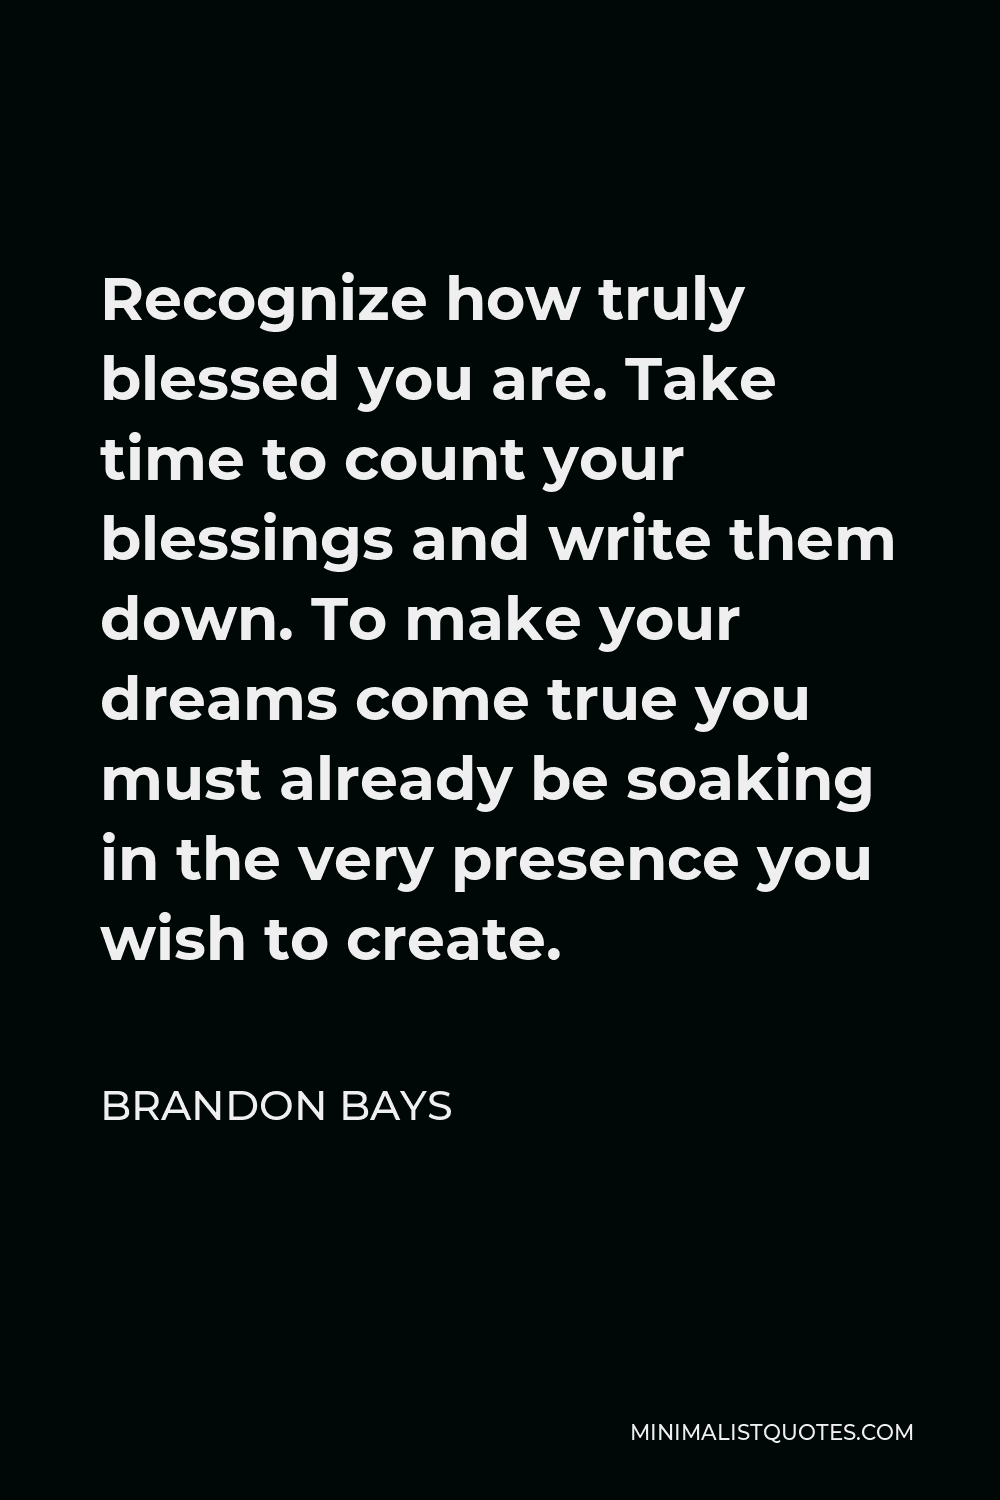 Brandon Bays Quote - Recognize how truly blessed you are. Take time to count your blessings and write them down. To make your dreams come true you must already be soaking in the very presence you wish to create.